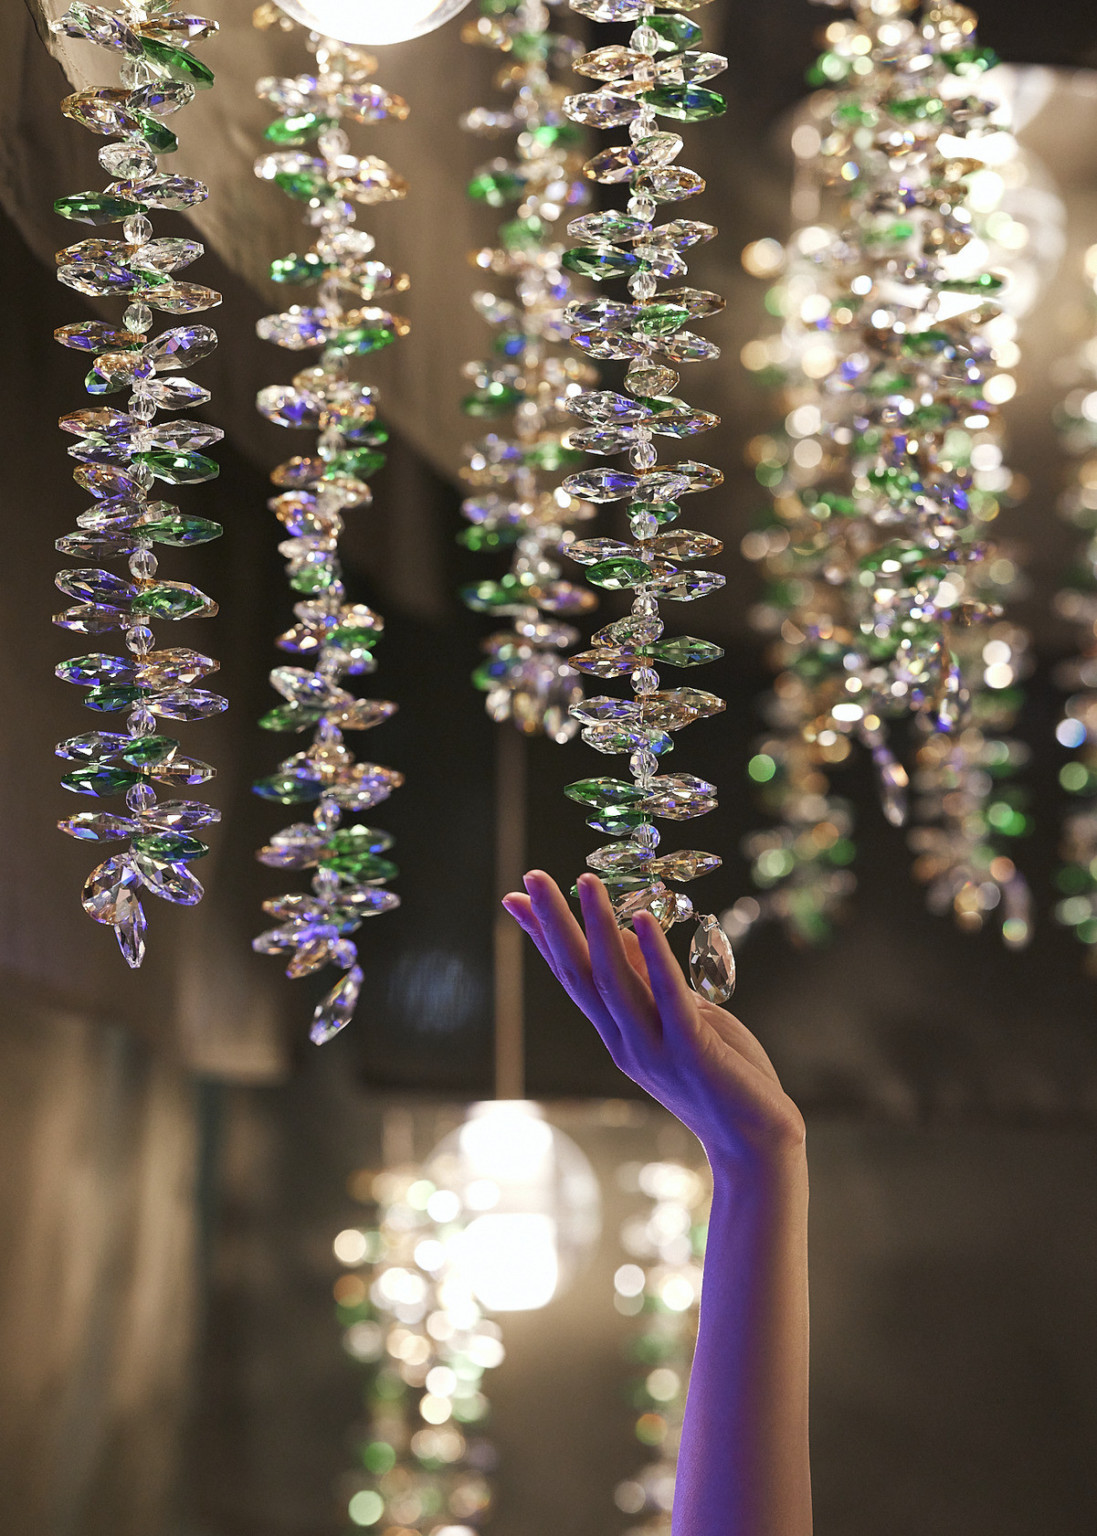 Hand reaches up to touch purple, green, and yellow tinted glass bead strands hanging from pendant lights